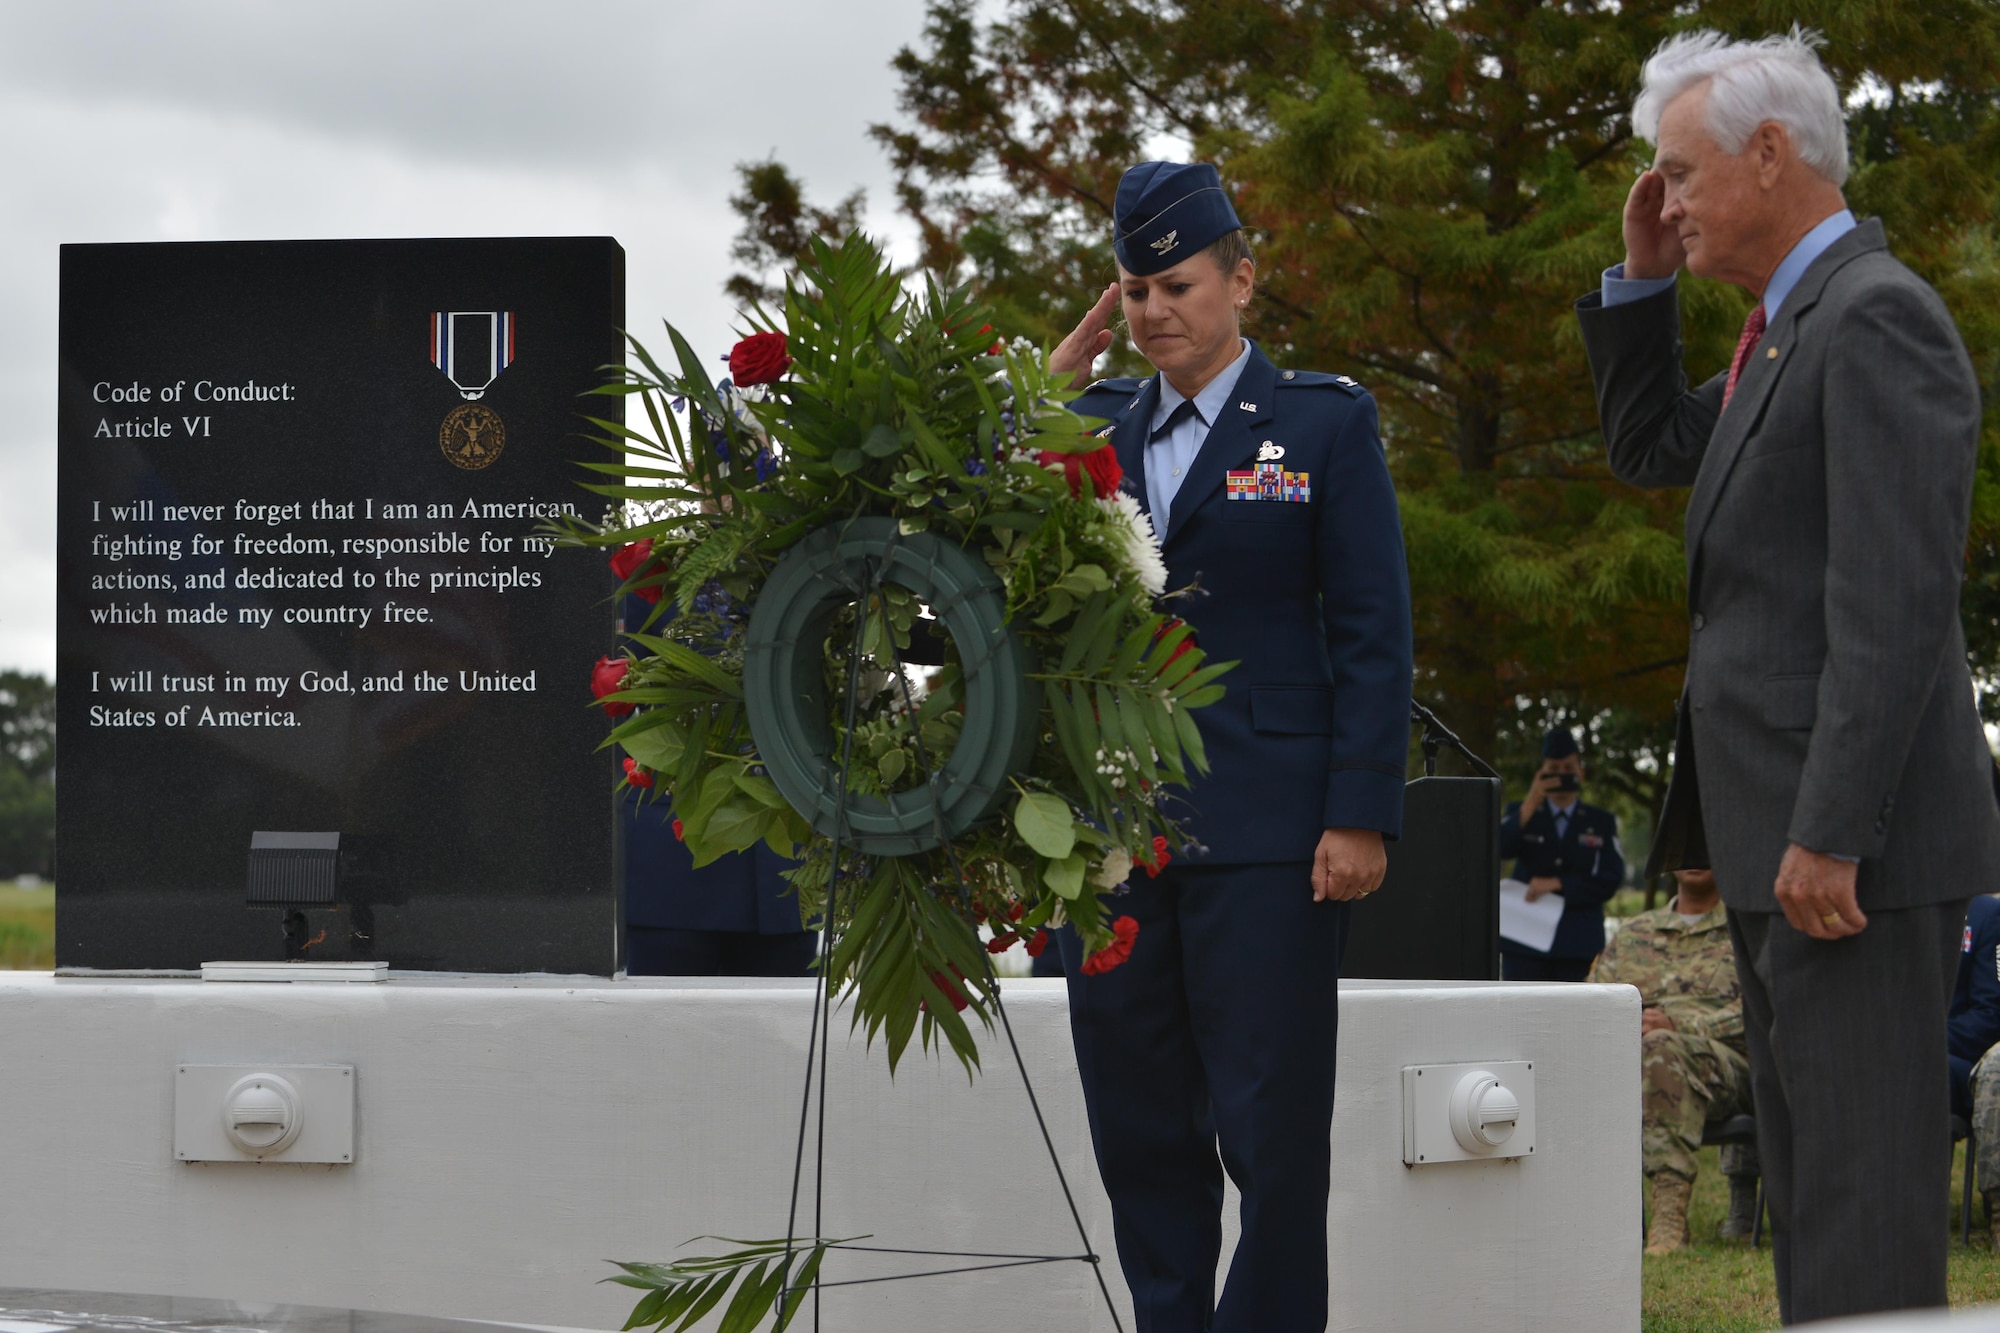 U.S. Air Force Col. Caroline M. Miller, 633rd Air Base Wing commander, and retired U.S. Air Force Lt. Col. Barry B. Bridger, former Vietnam War prisoner of war, salute the POW/MIA wreath at the POW/MIA Recognition Day ceremony at Joint Base Langley-Eustis, Va., Sept. 16, 2016. Observances of National POW/MIA Recognition Day are held across the country on military installations, ships at sea, state capitols, schools and veterans' facilities. (U.S. Air Force photo by Staff Sgt. Natasha Stannard)